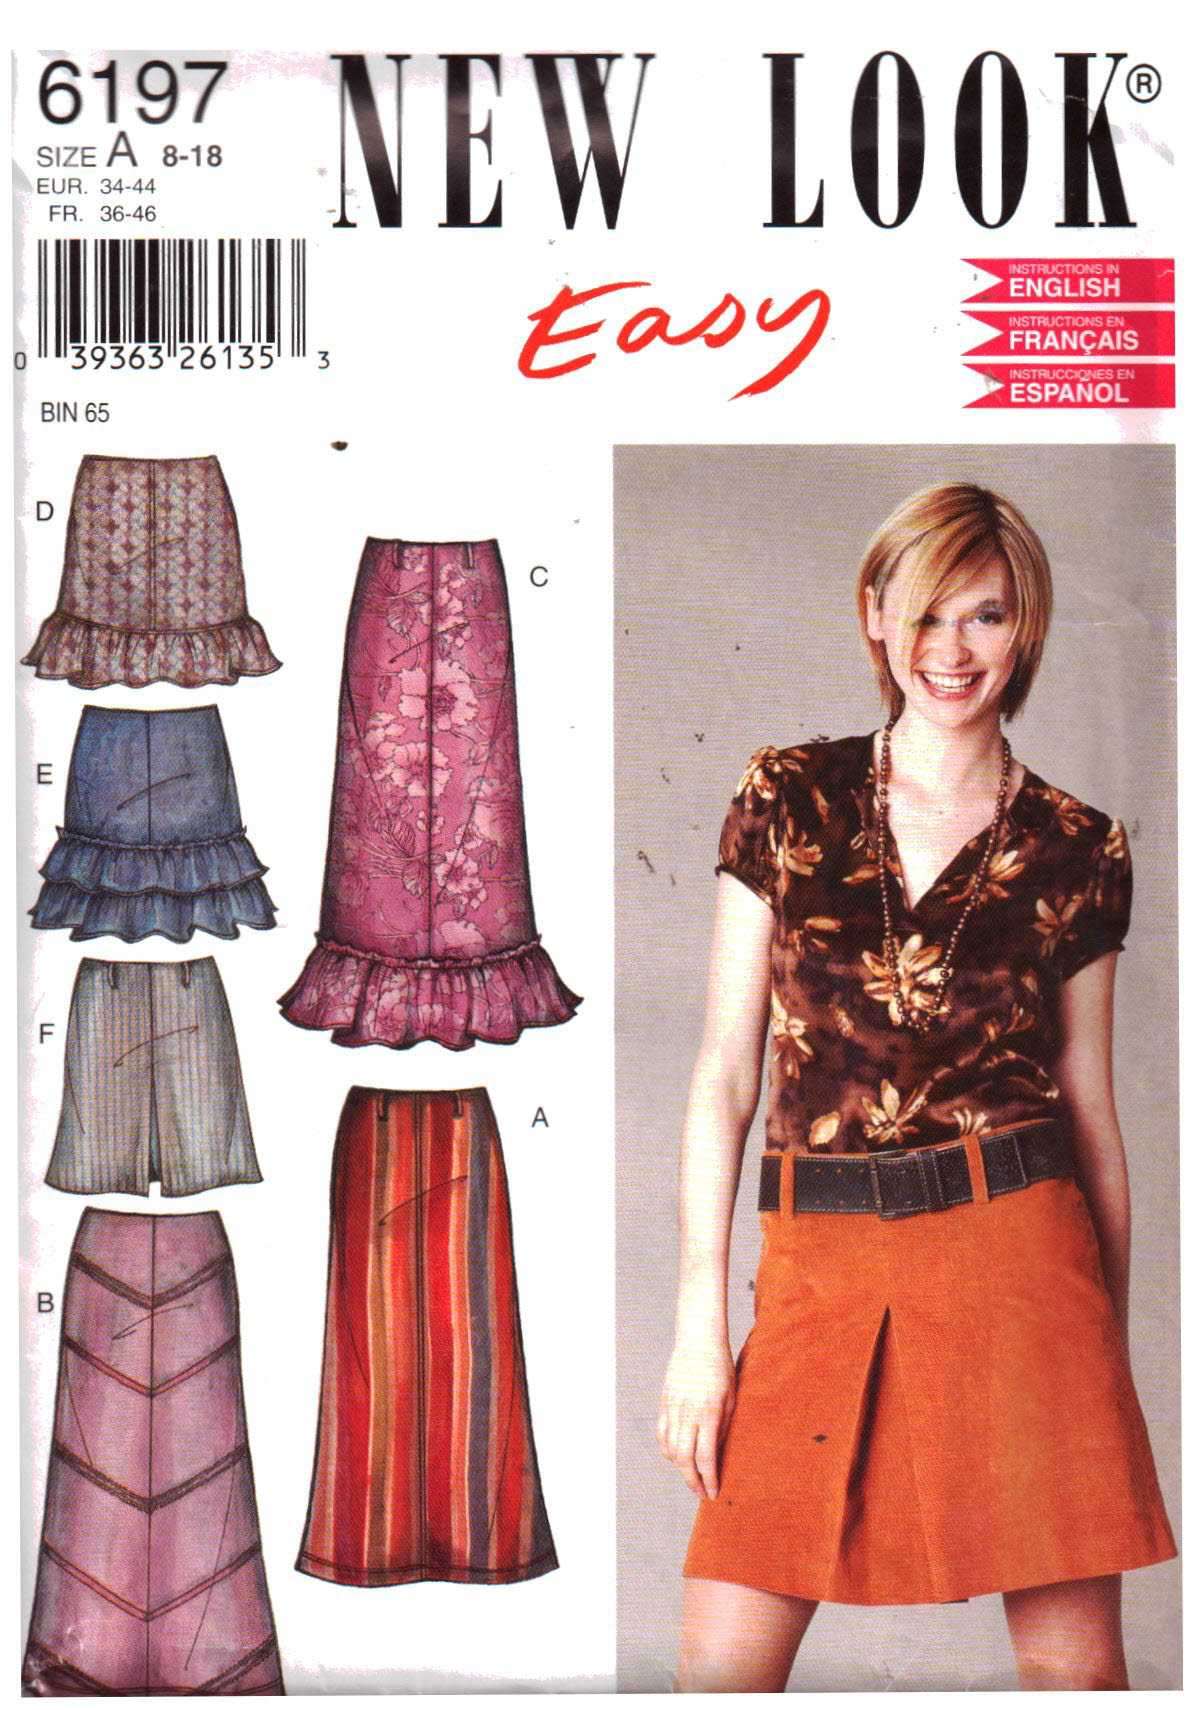 New Look 6197 Skits Size: A 8-18 Used Sewing Pattern